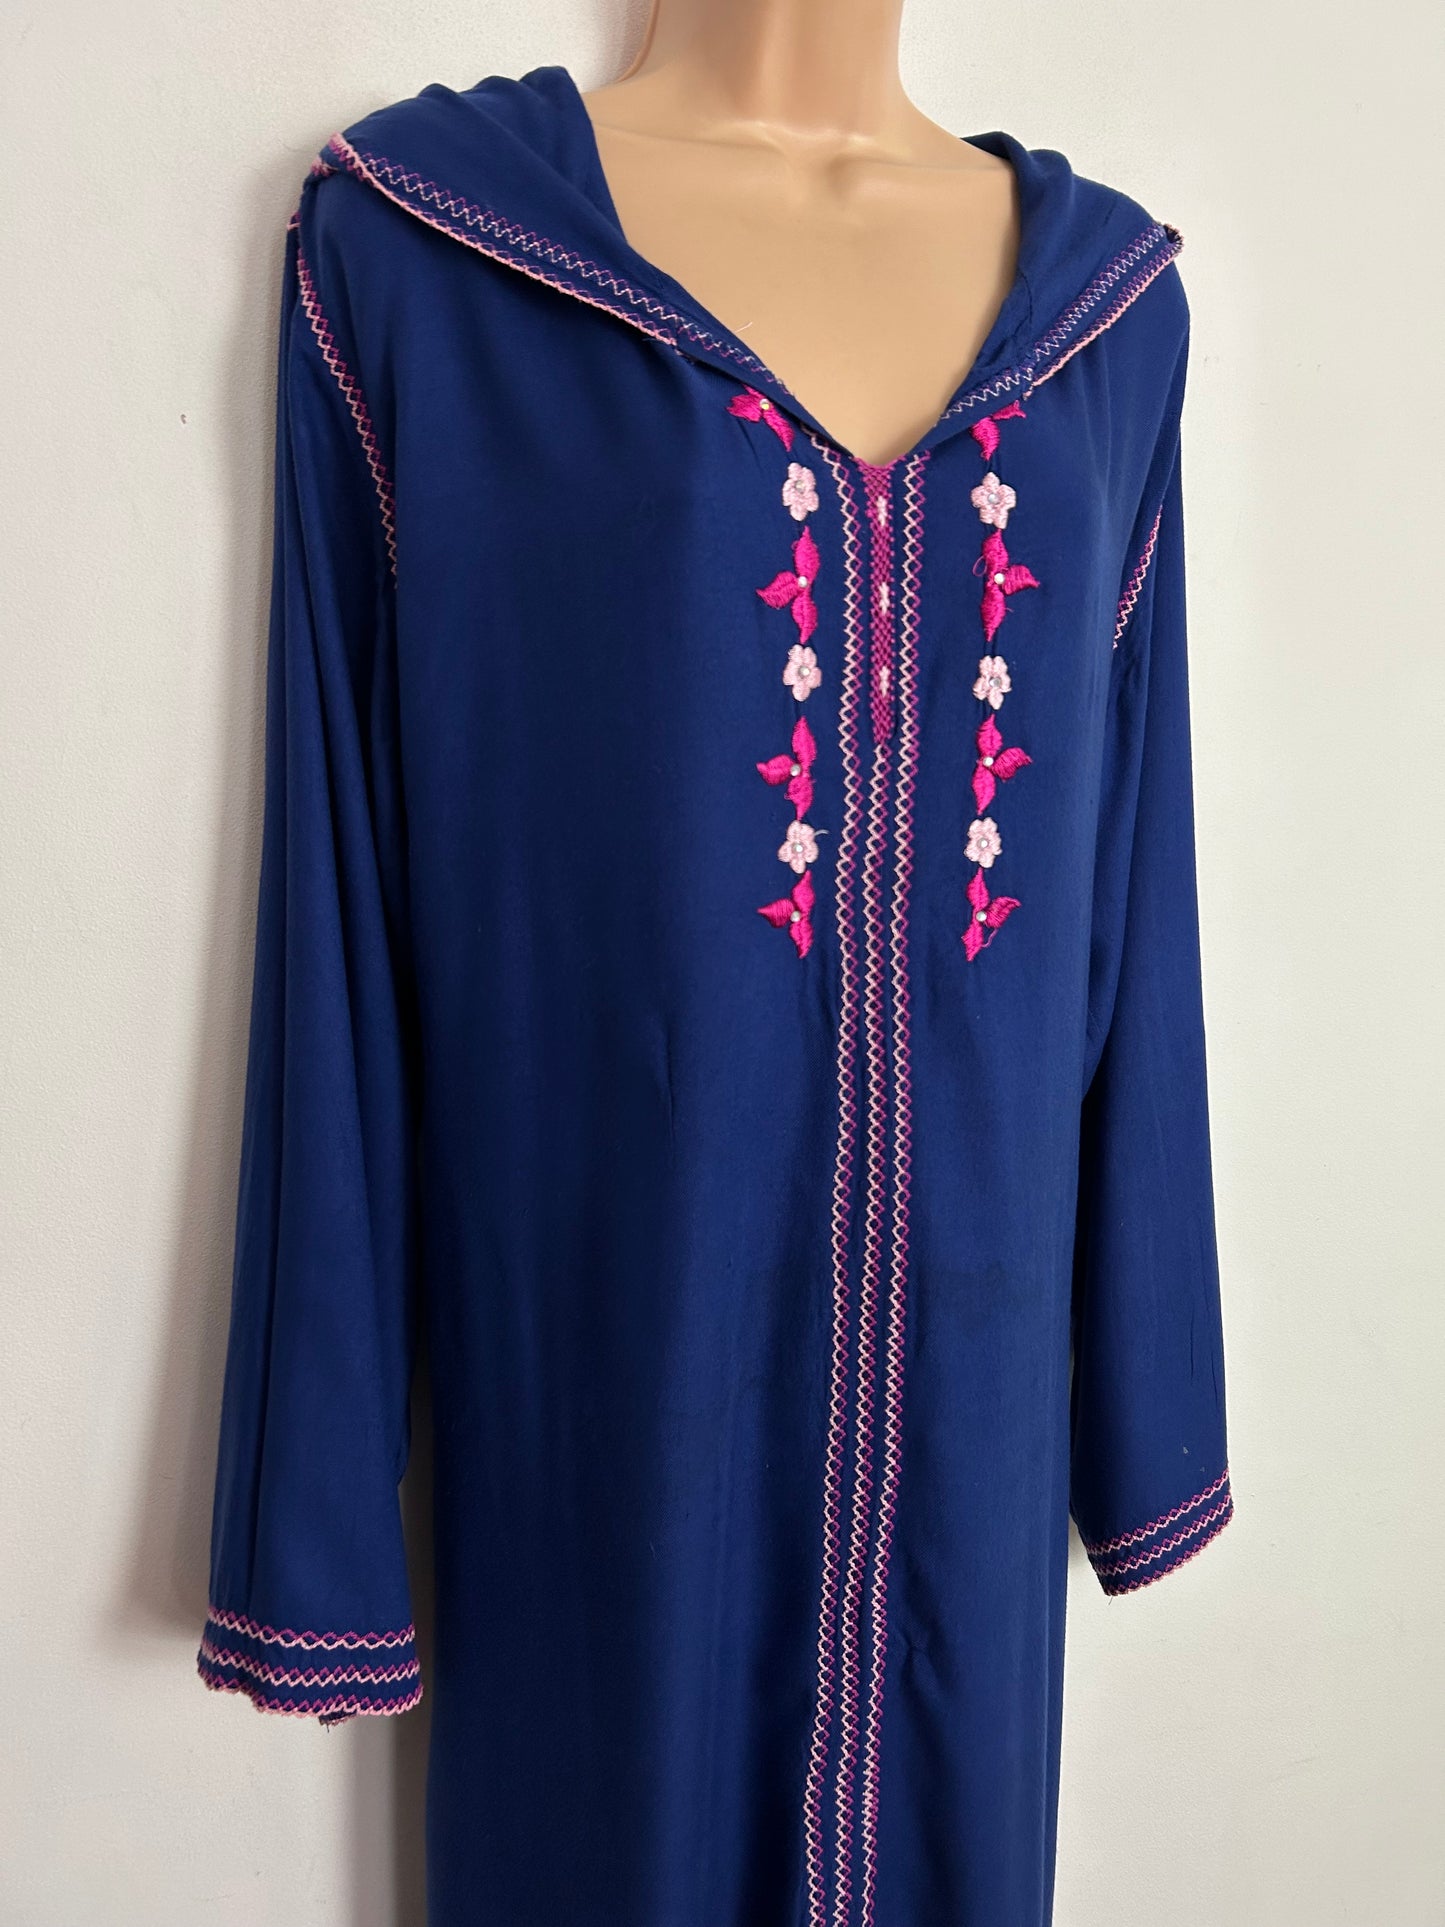 Vintage Free Size Up To Size 20-22 Navy Blue Pink Stich & Embroidered Detail Moroccan Hooded Abaya Kaftan